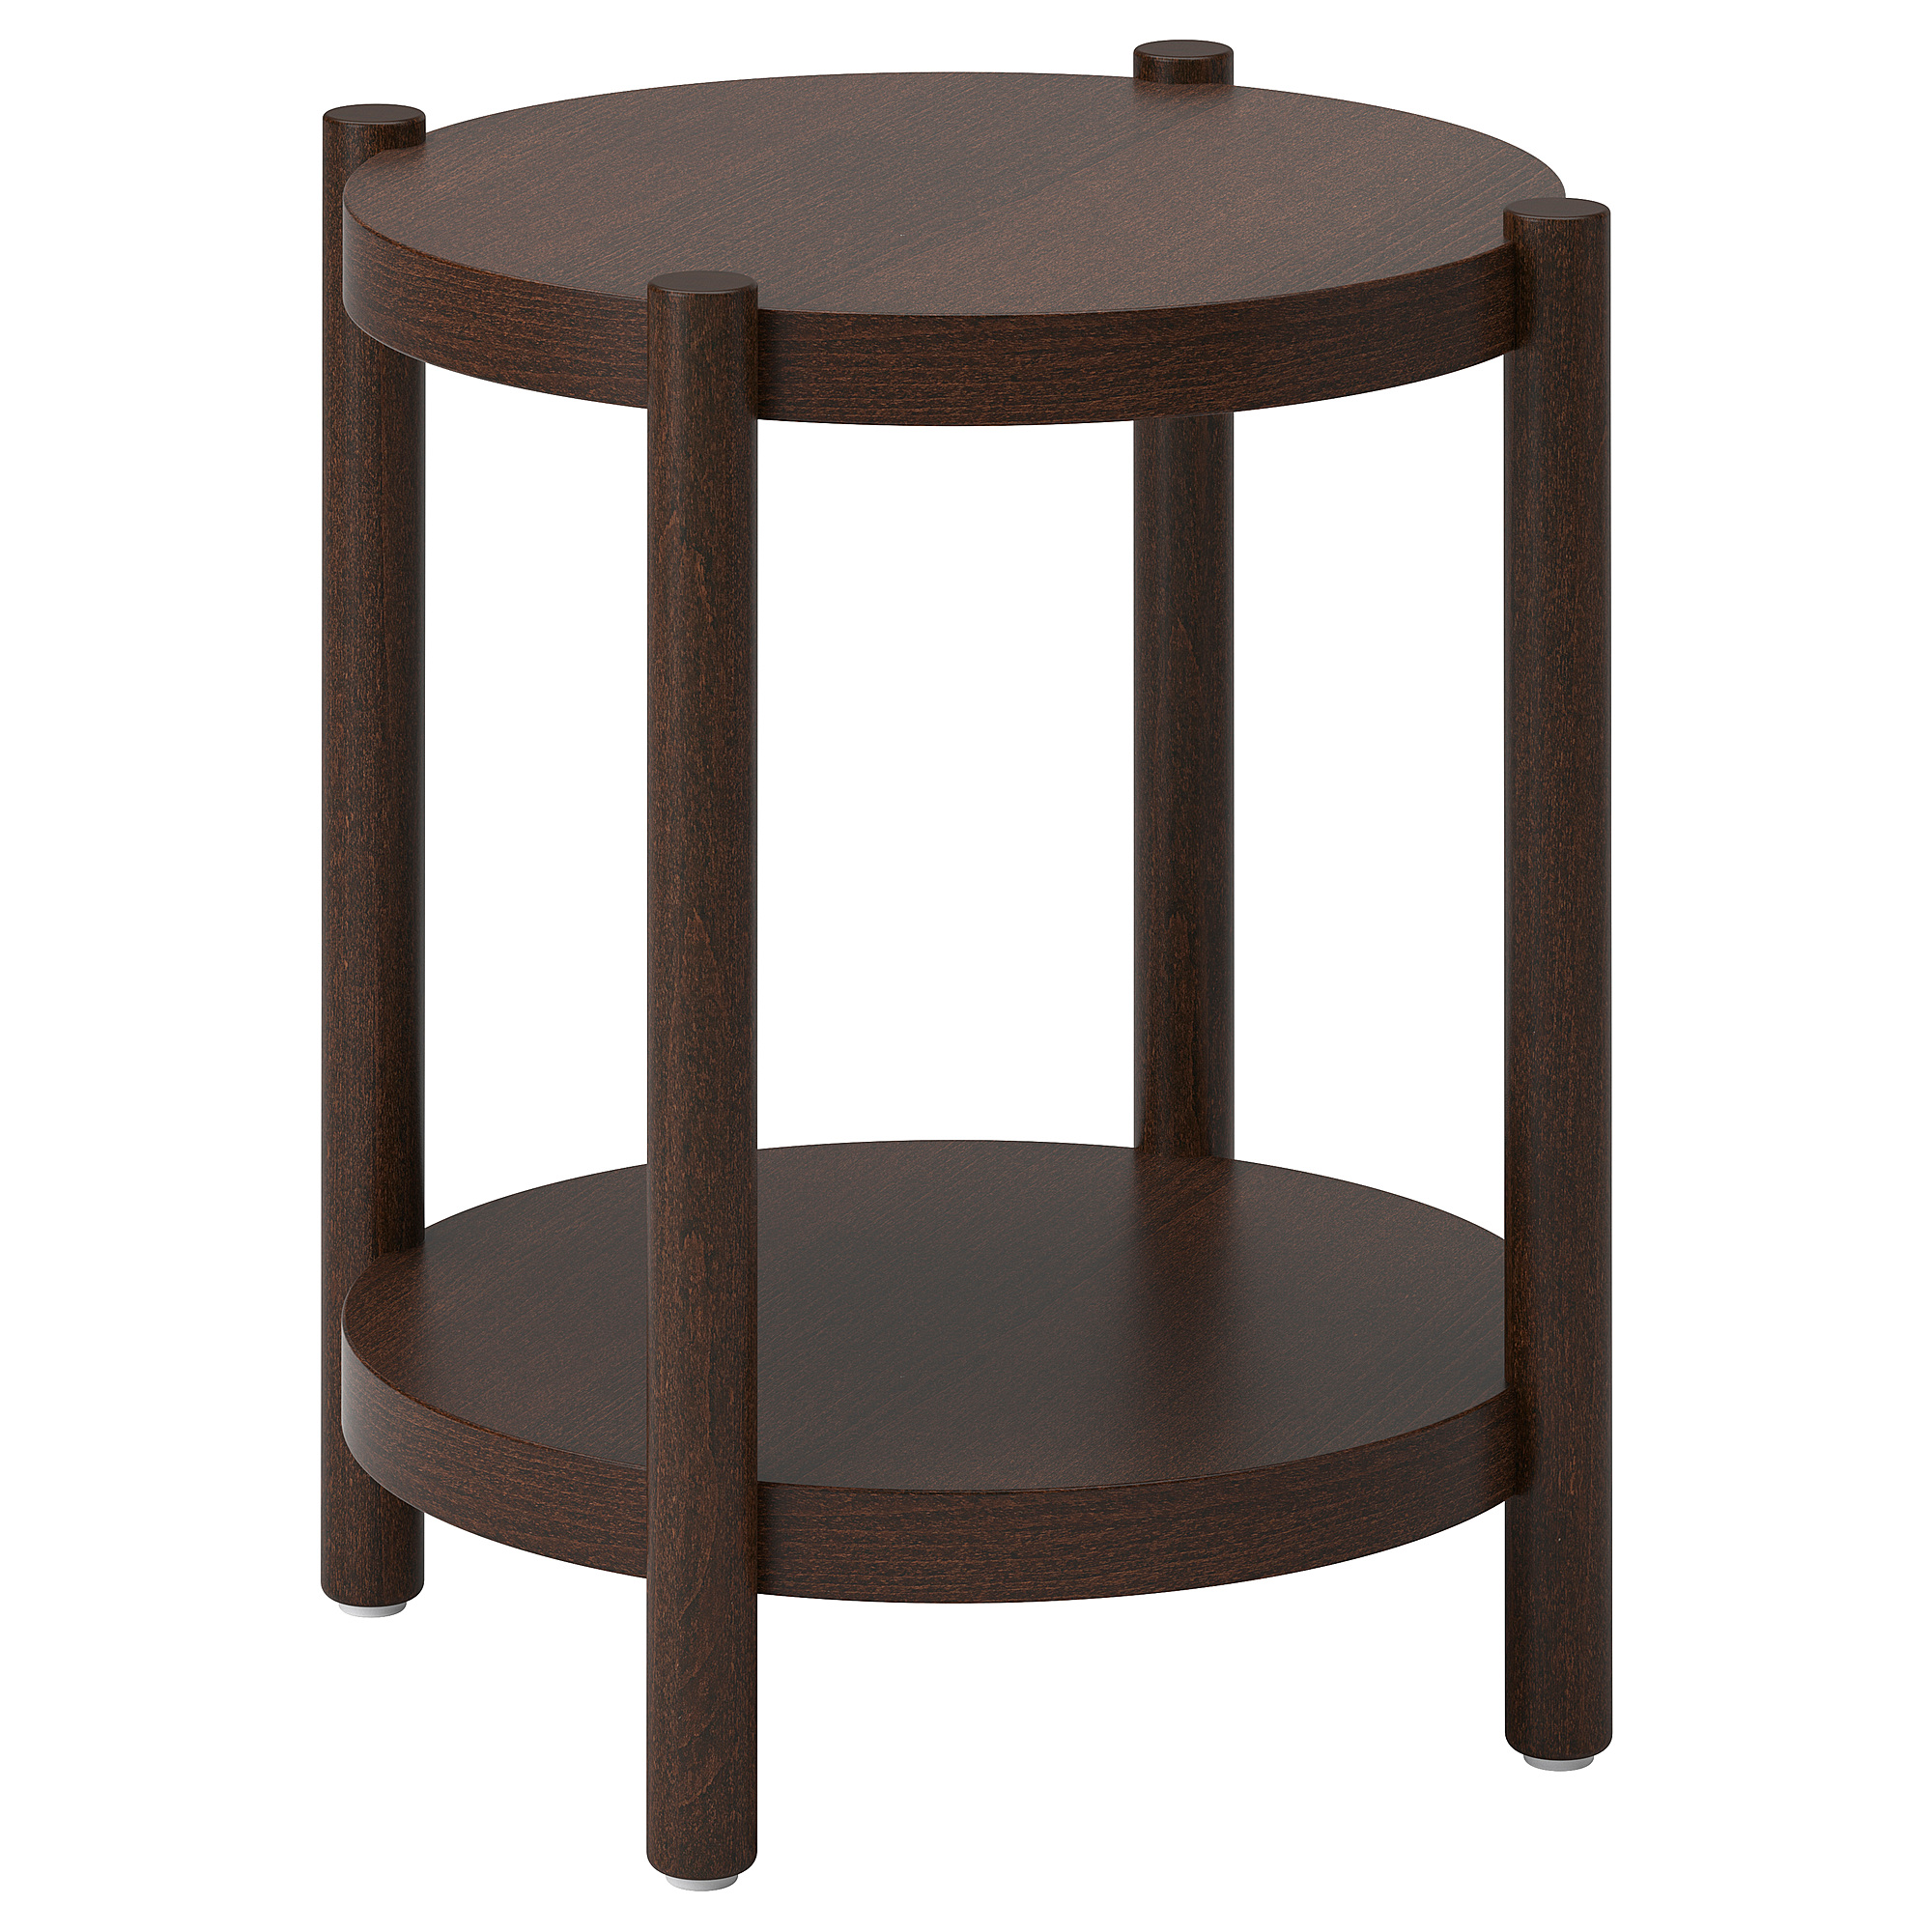 LISTERBY side table